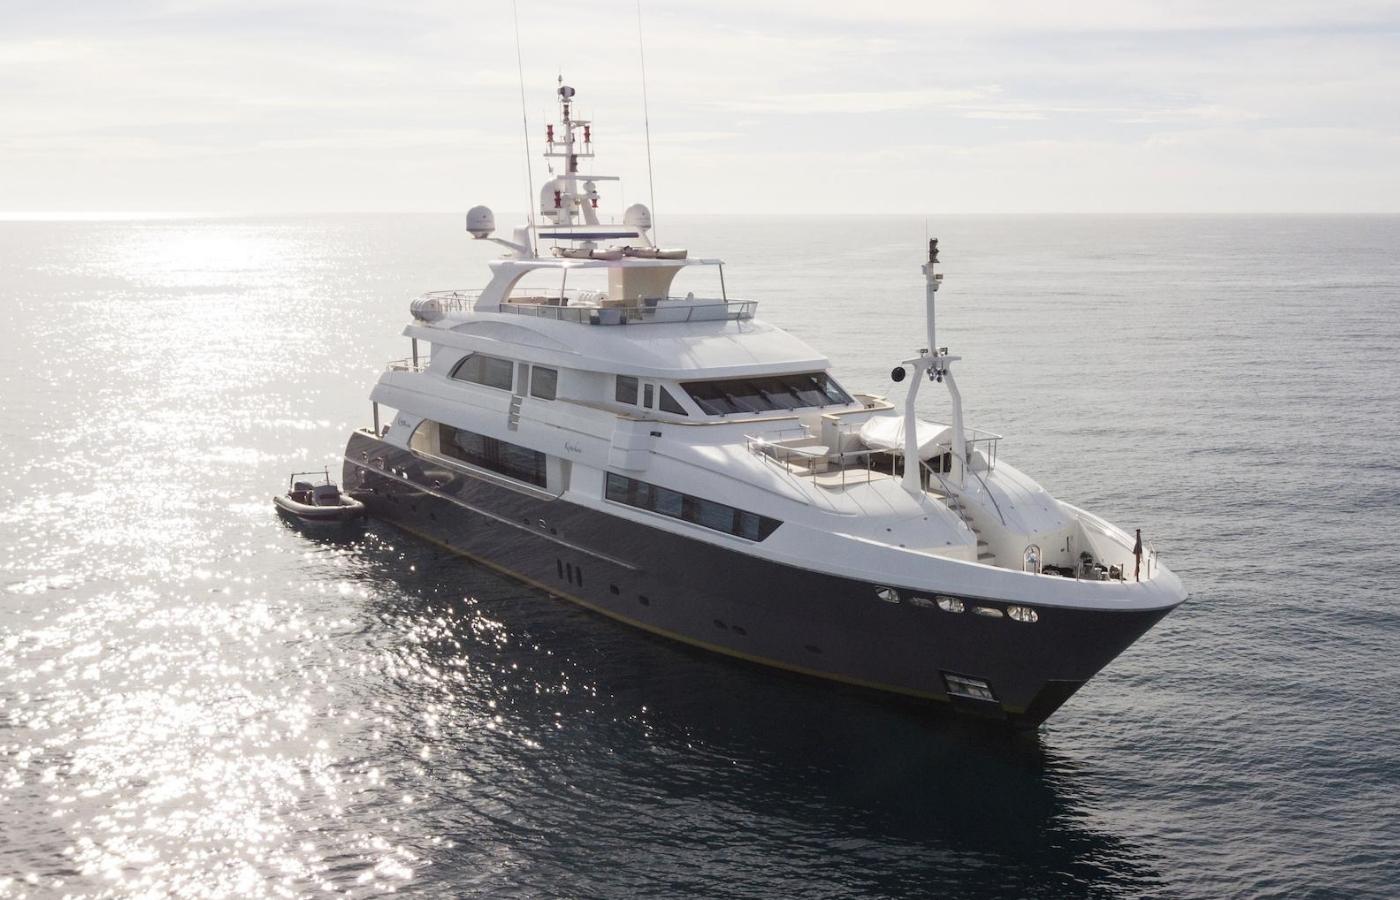 Wind Farm Magnate Says Goodbye to His World-Cruising Superyacht After a Decade [In the News]